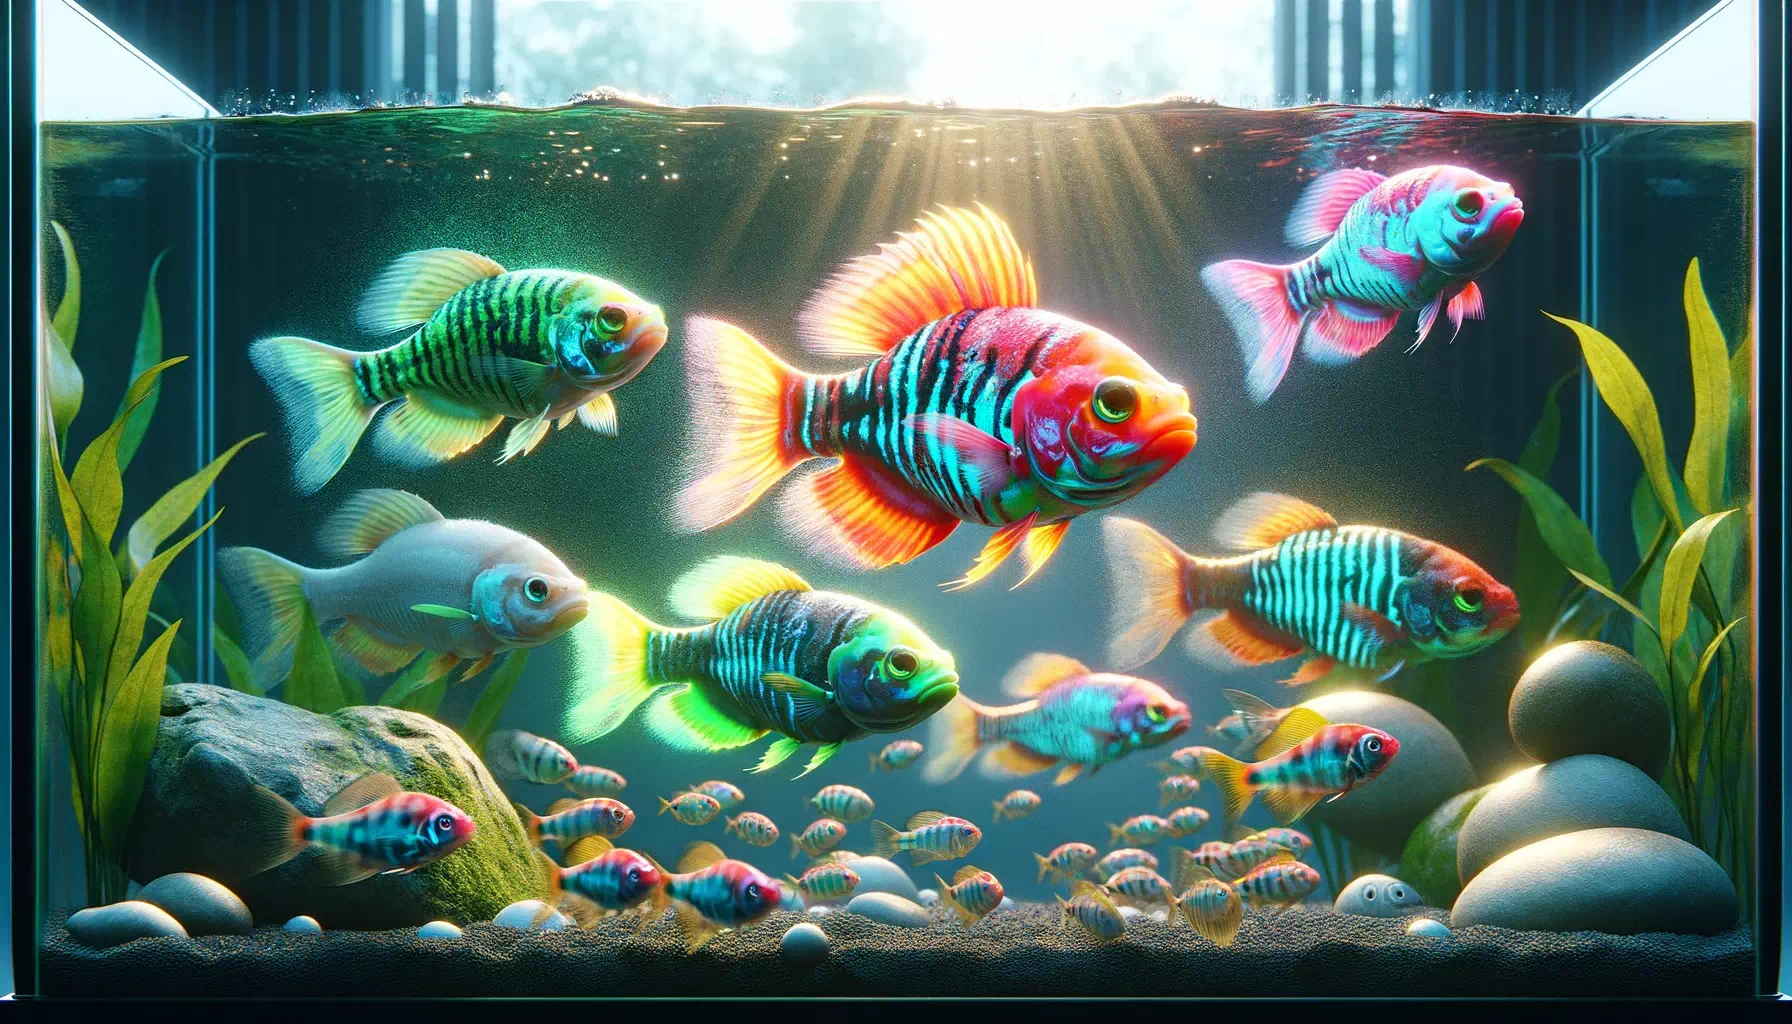 depicting the behavioral and appearance changes in fish post-GloFish transformation. The scene contrasts the